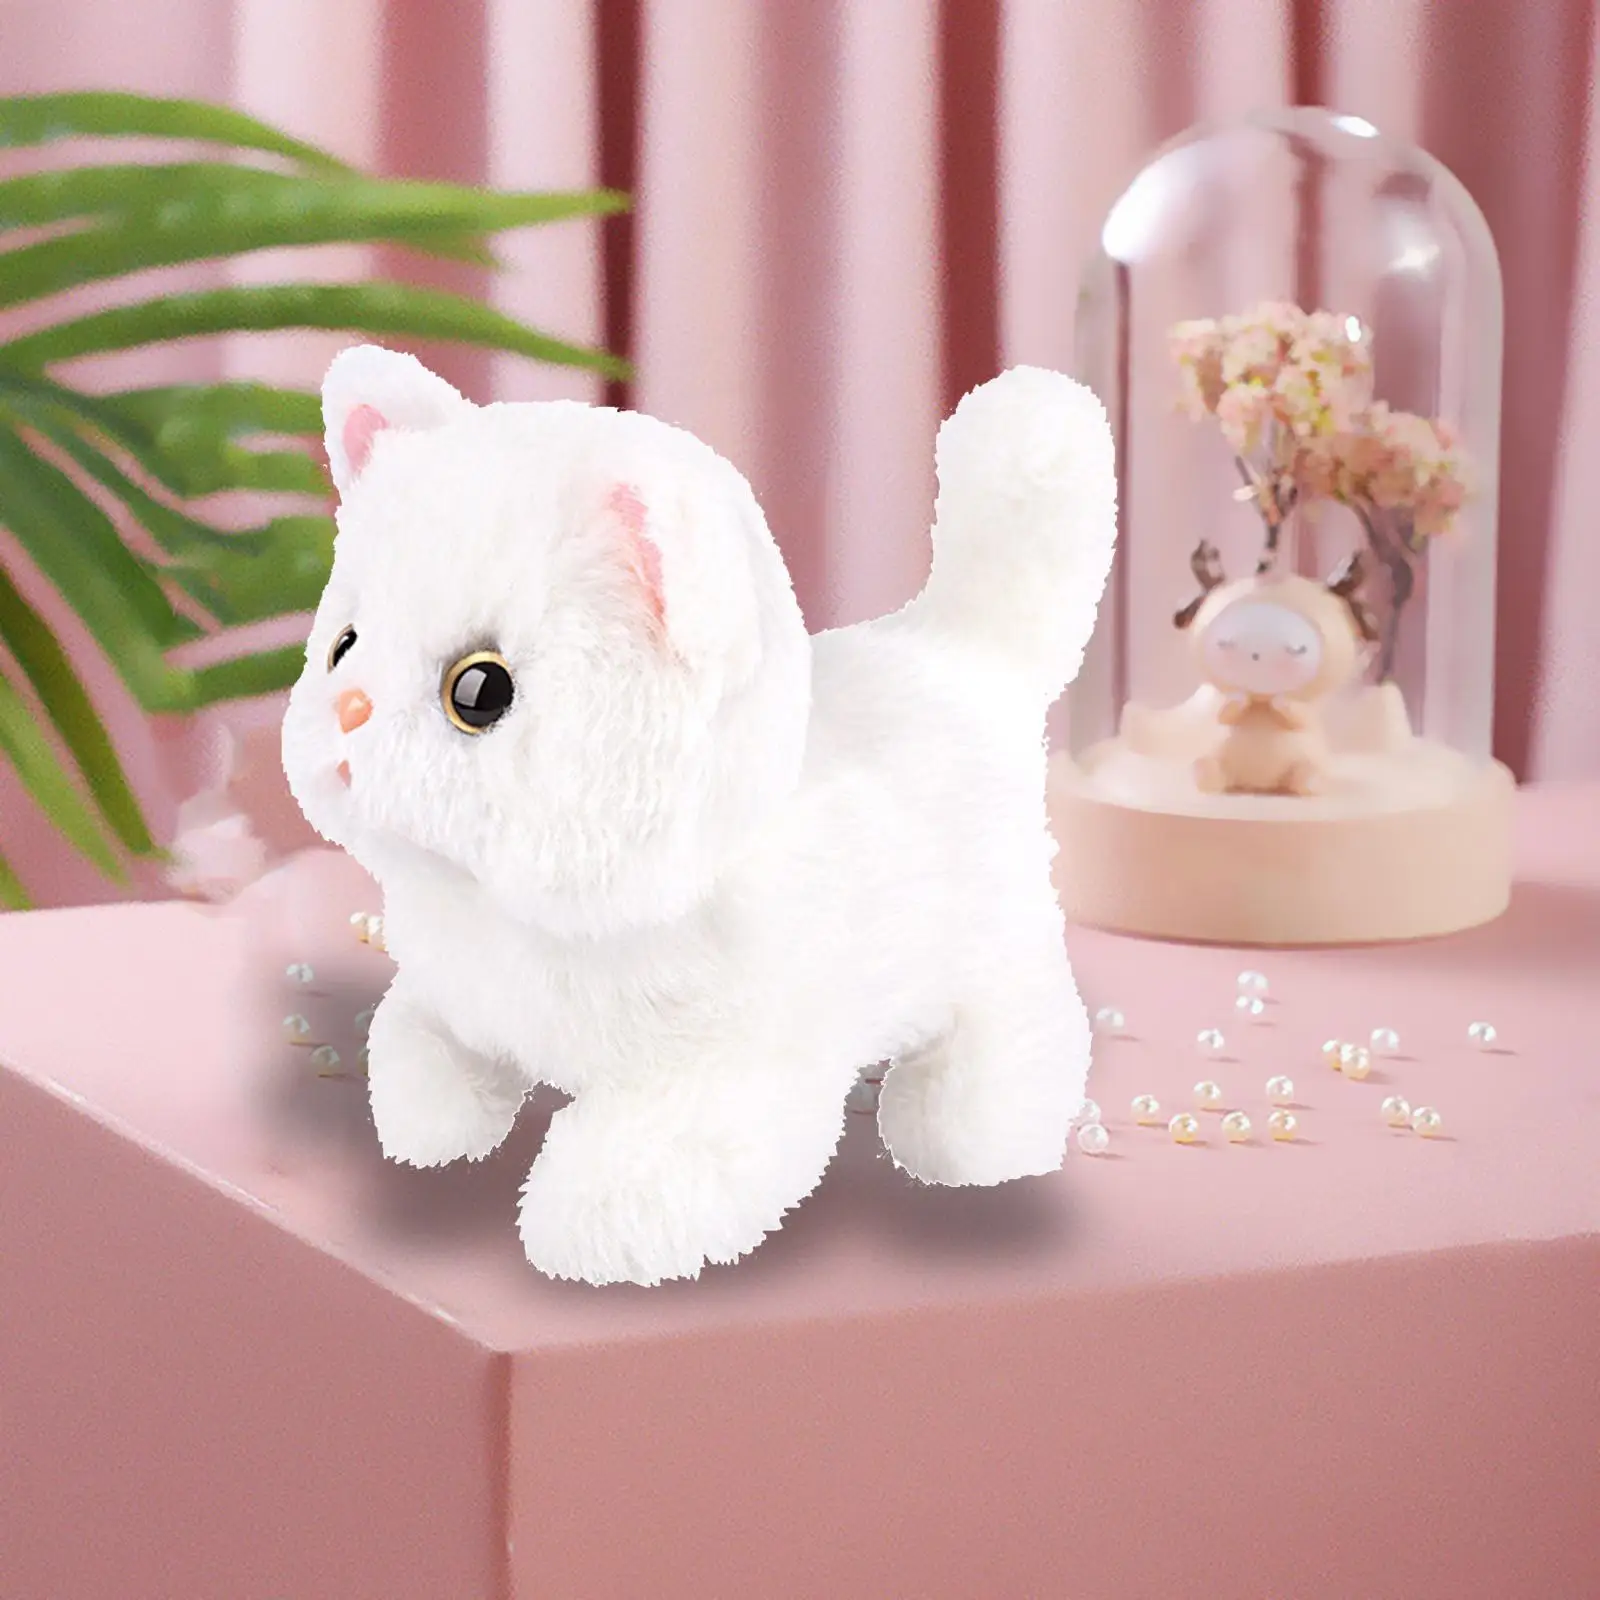 Cute Electric Cat Plush Toy,Robotic Pet Toy,Soft Plush Musical Gift Appease Toy, Interactive Play Stuffed Animal for Boys Girls